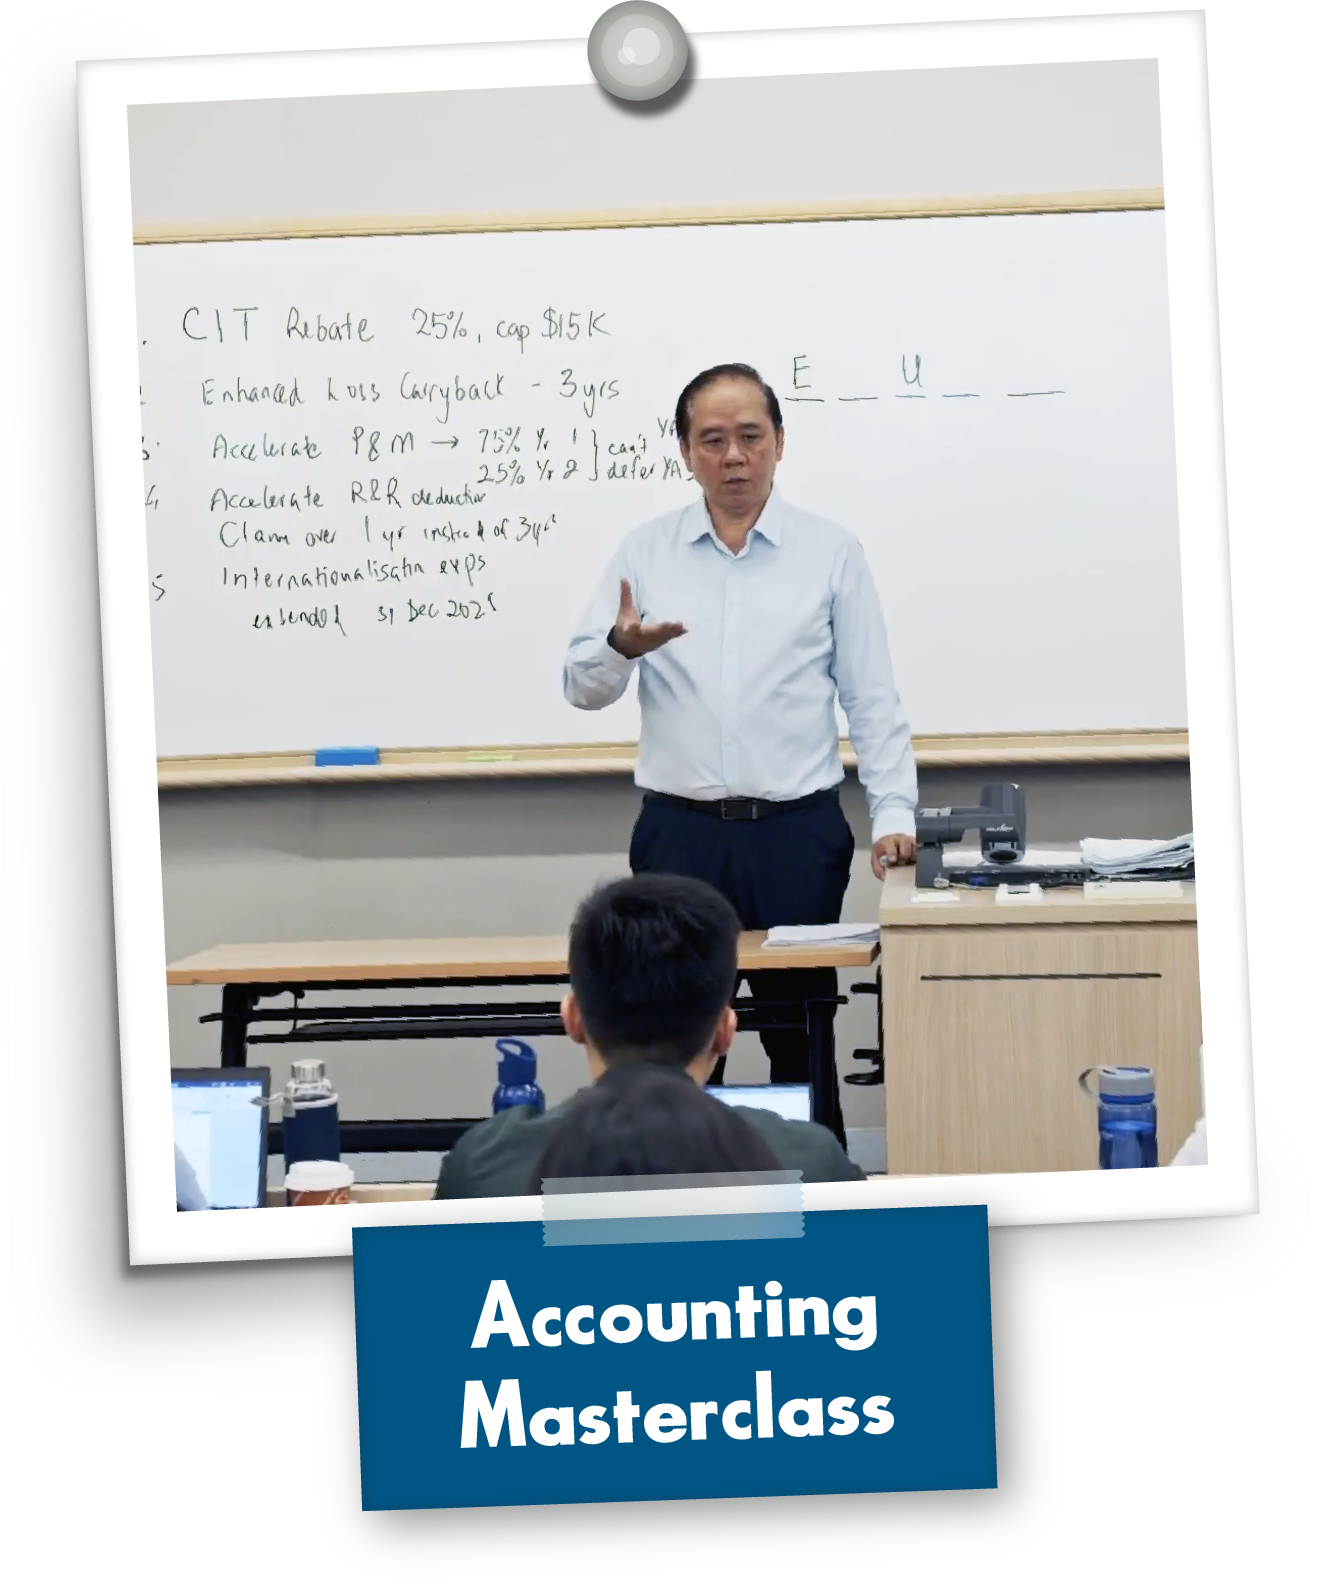 WATCH OUR ACCOUNTING MASTERCLASS